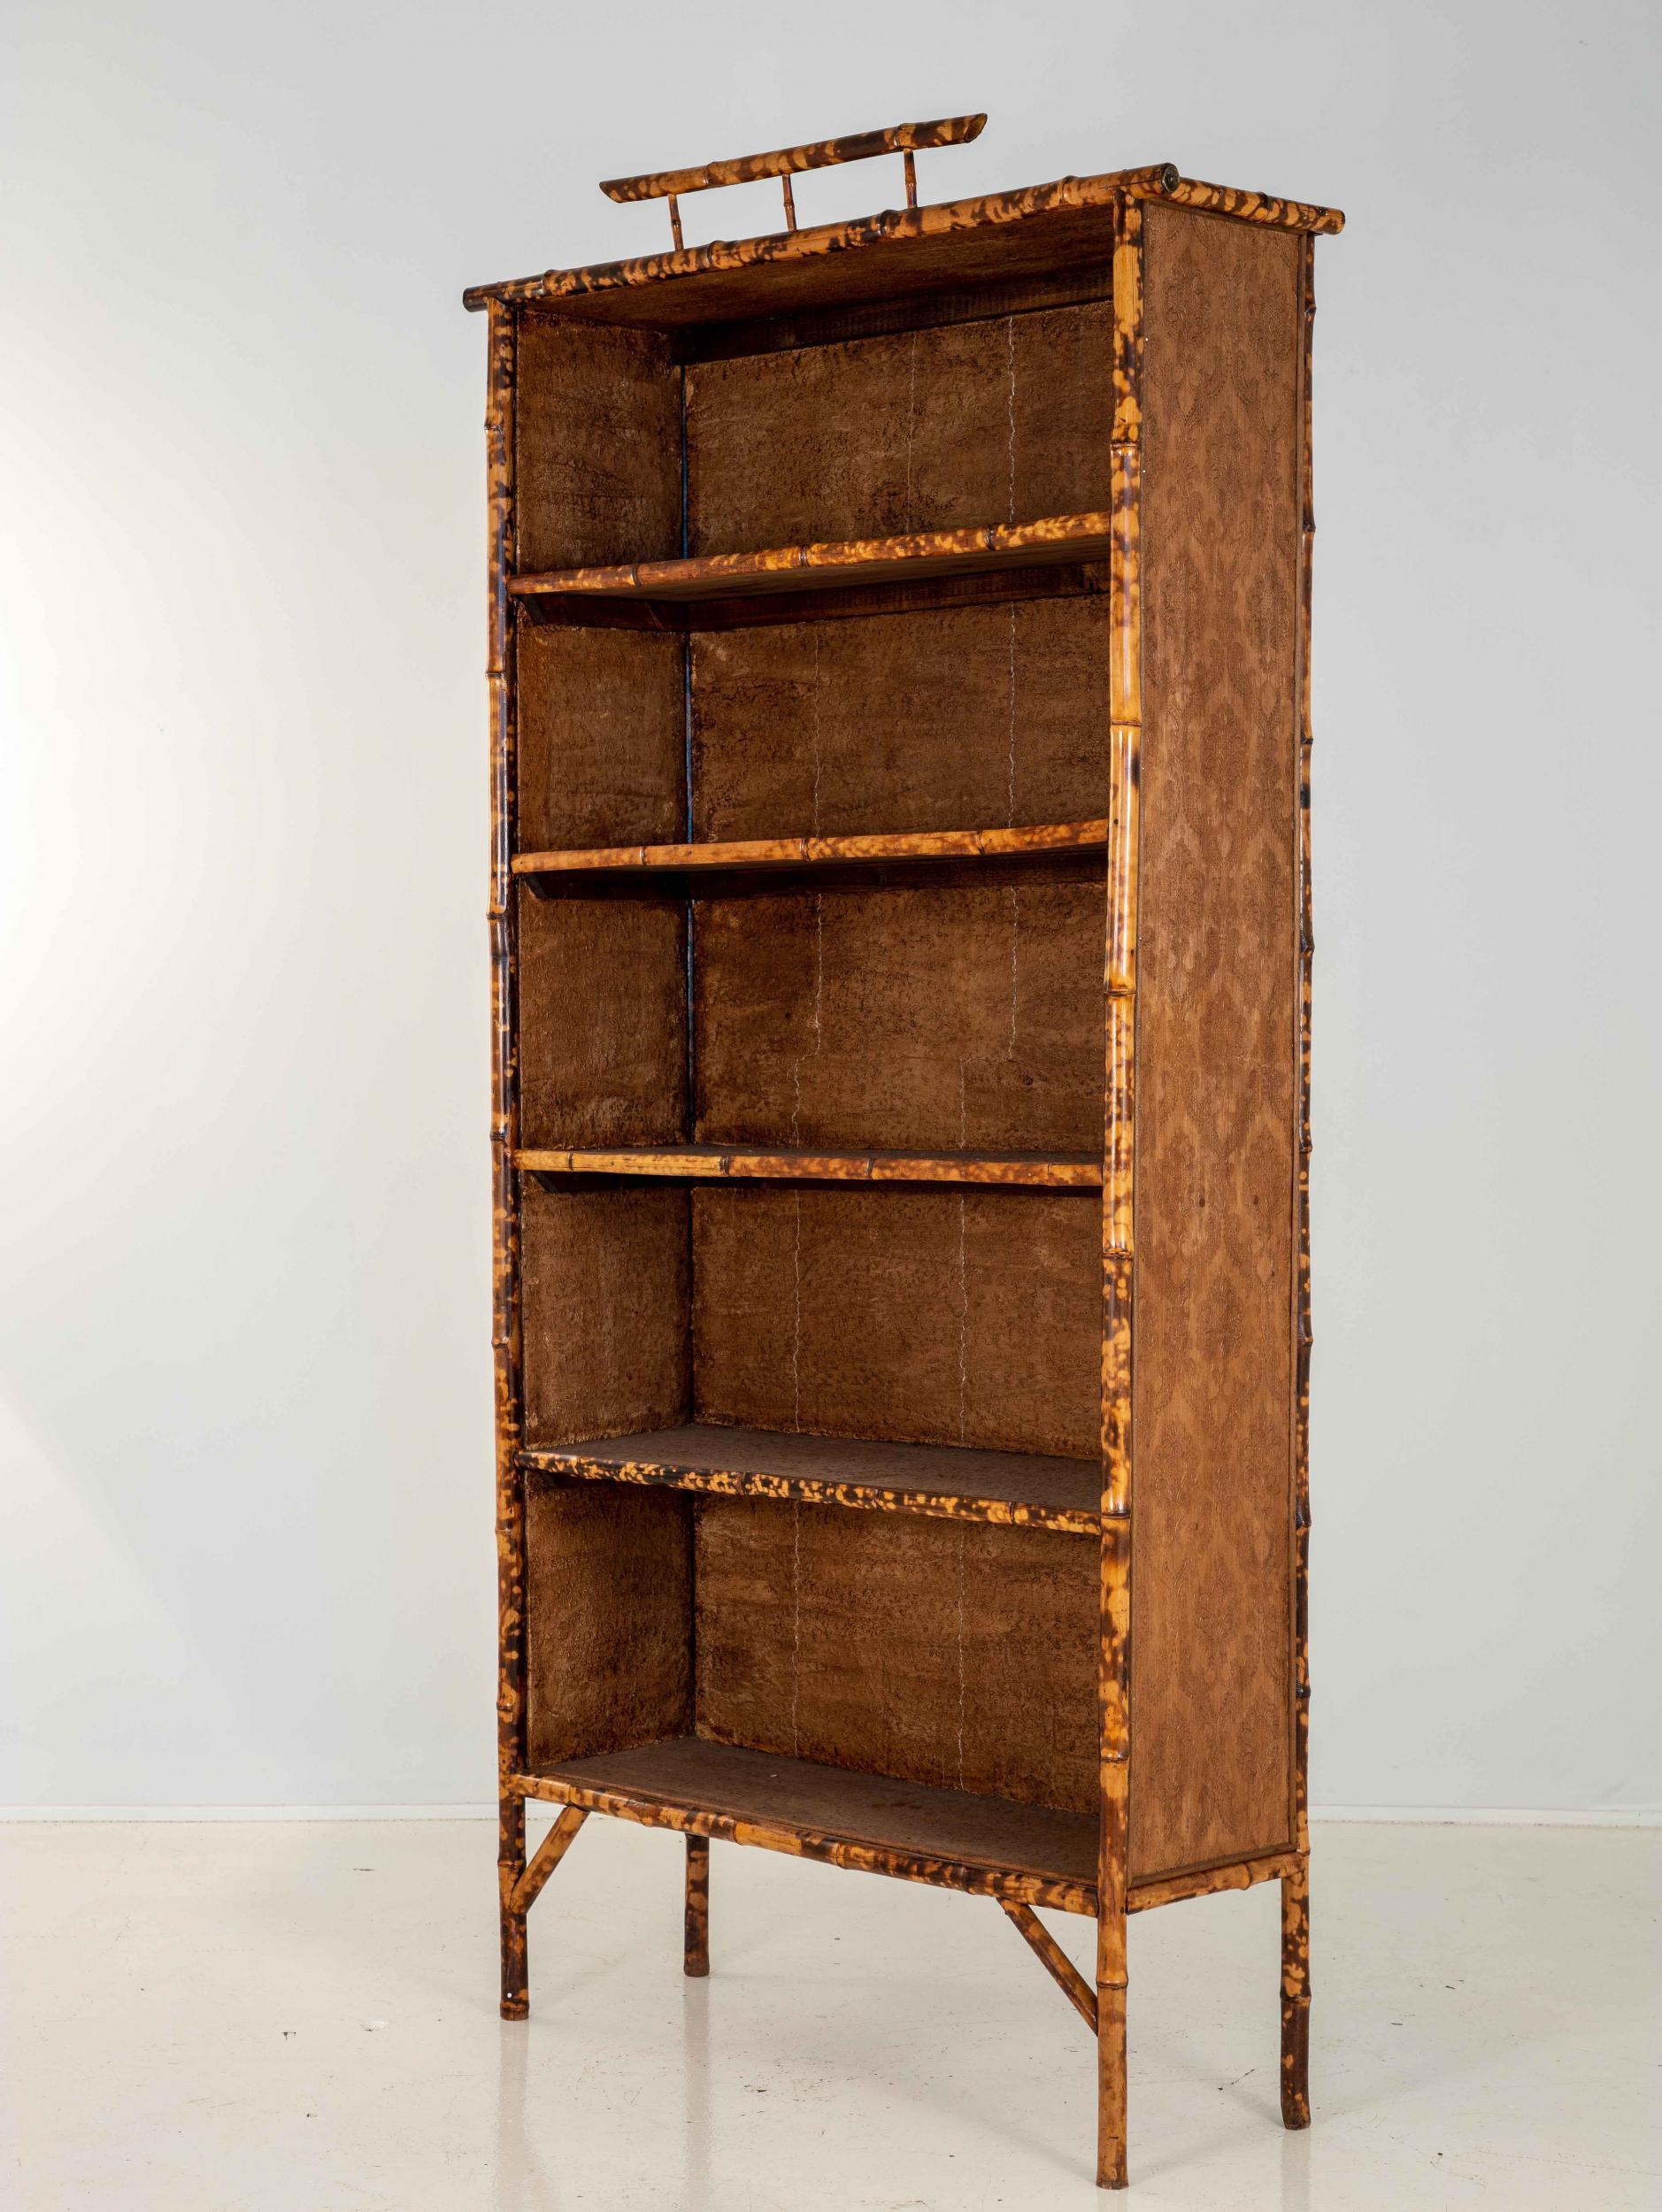 A tortoise bamboo bookshelf in the iconic Chinoiserie style. Five fixed shelves. Wear consistent with age and use.